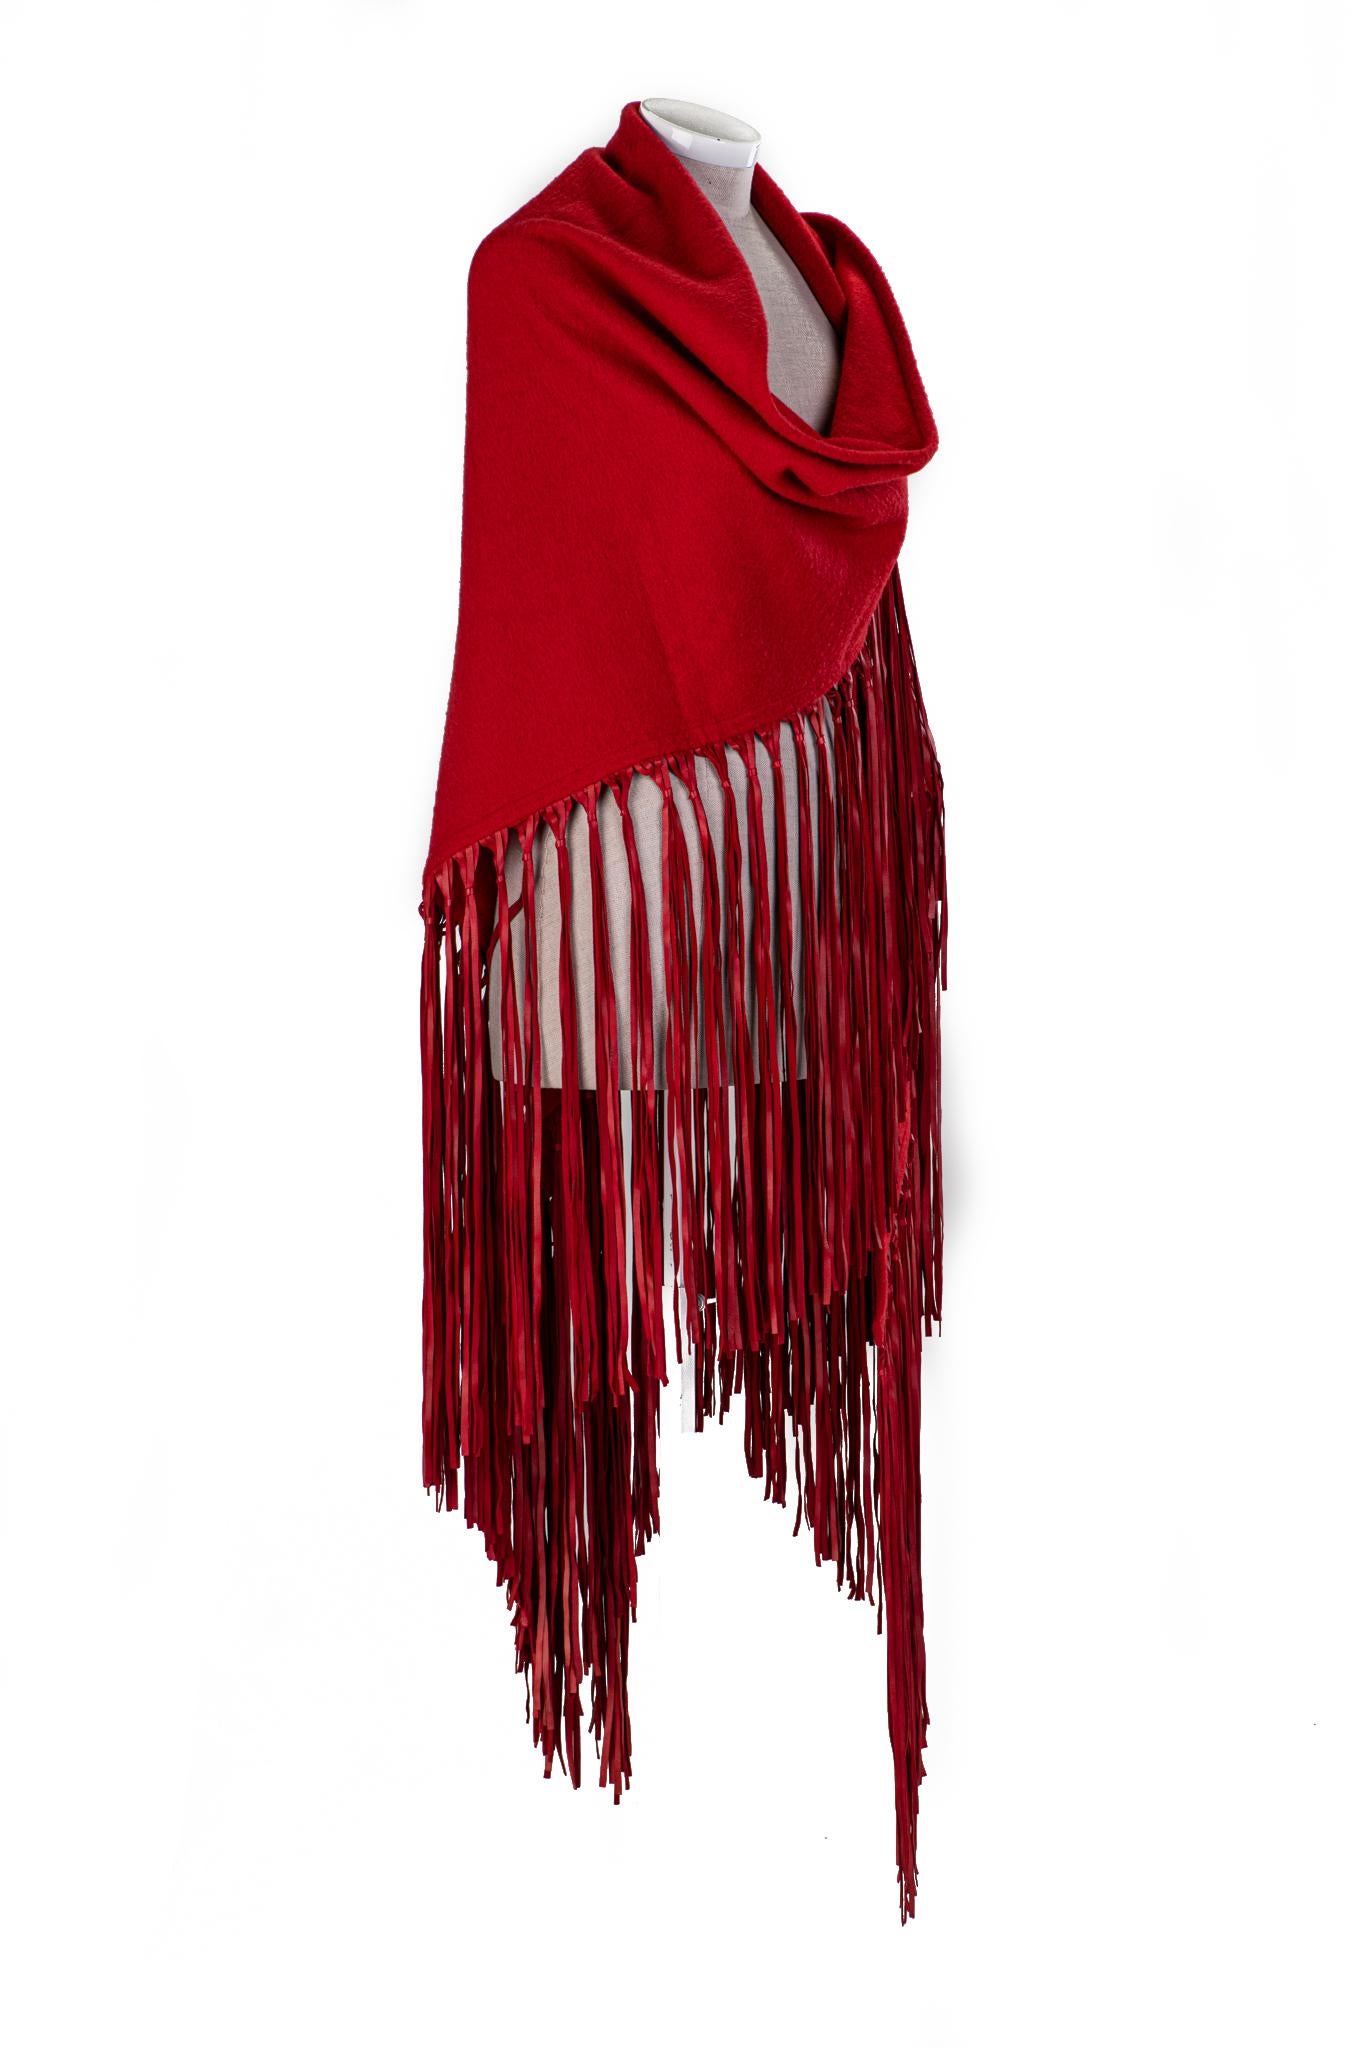 1990s Hermès red cashmere-and-wool shawl with extra-long leather fringe. Minor wear.
